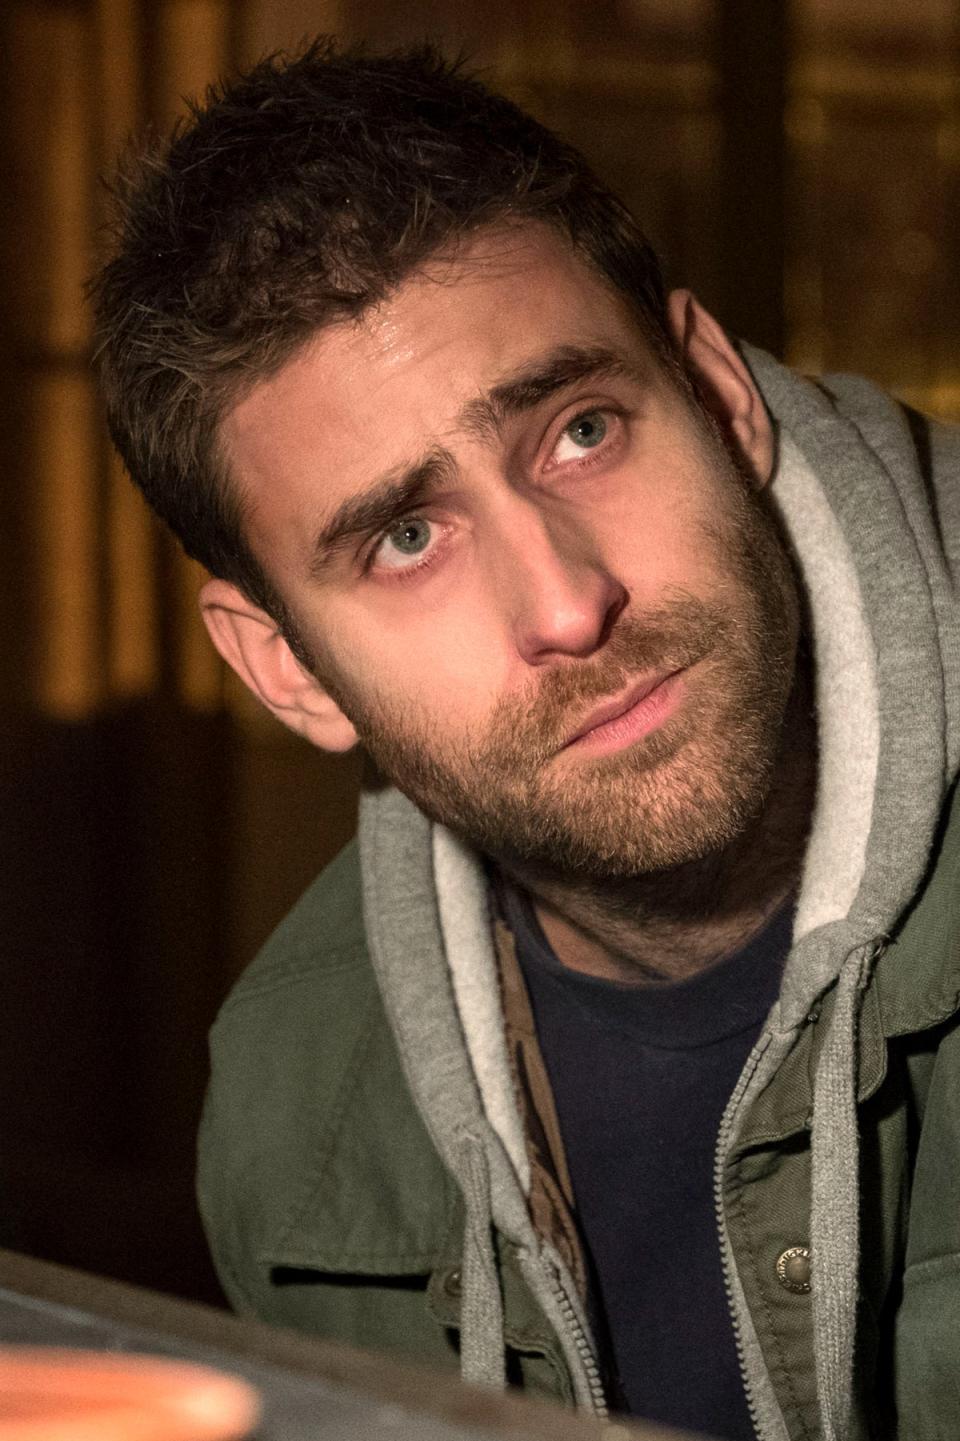 Cathartic: Jackson-Cohen in Netflix’s ‘The Haunting of Hill House’ (Netflix)